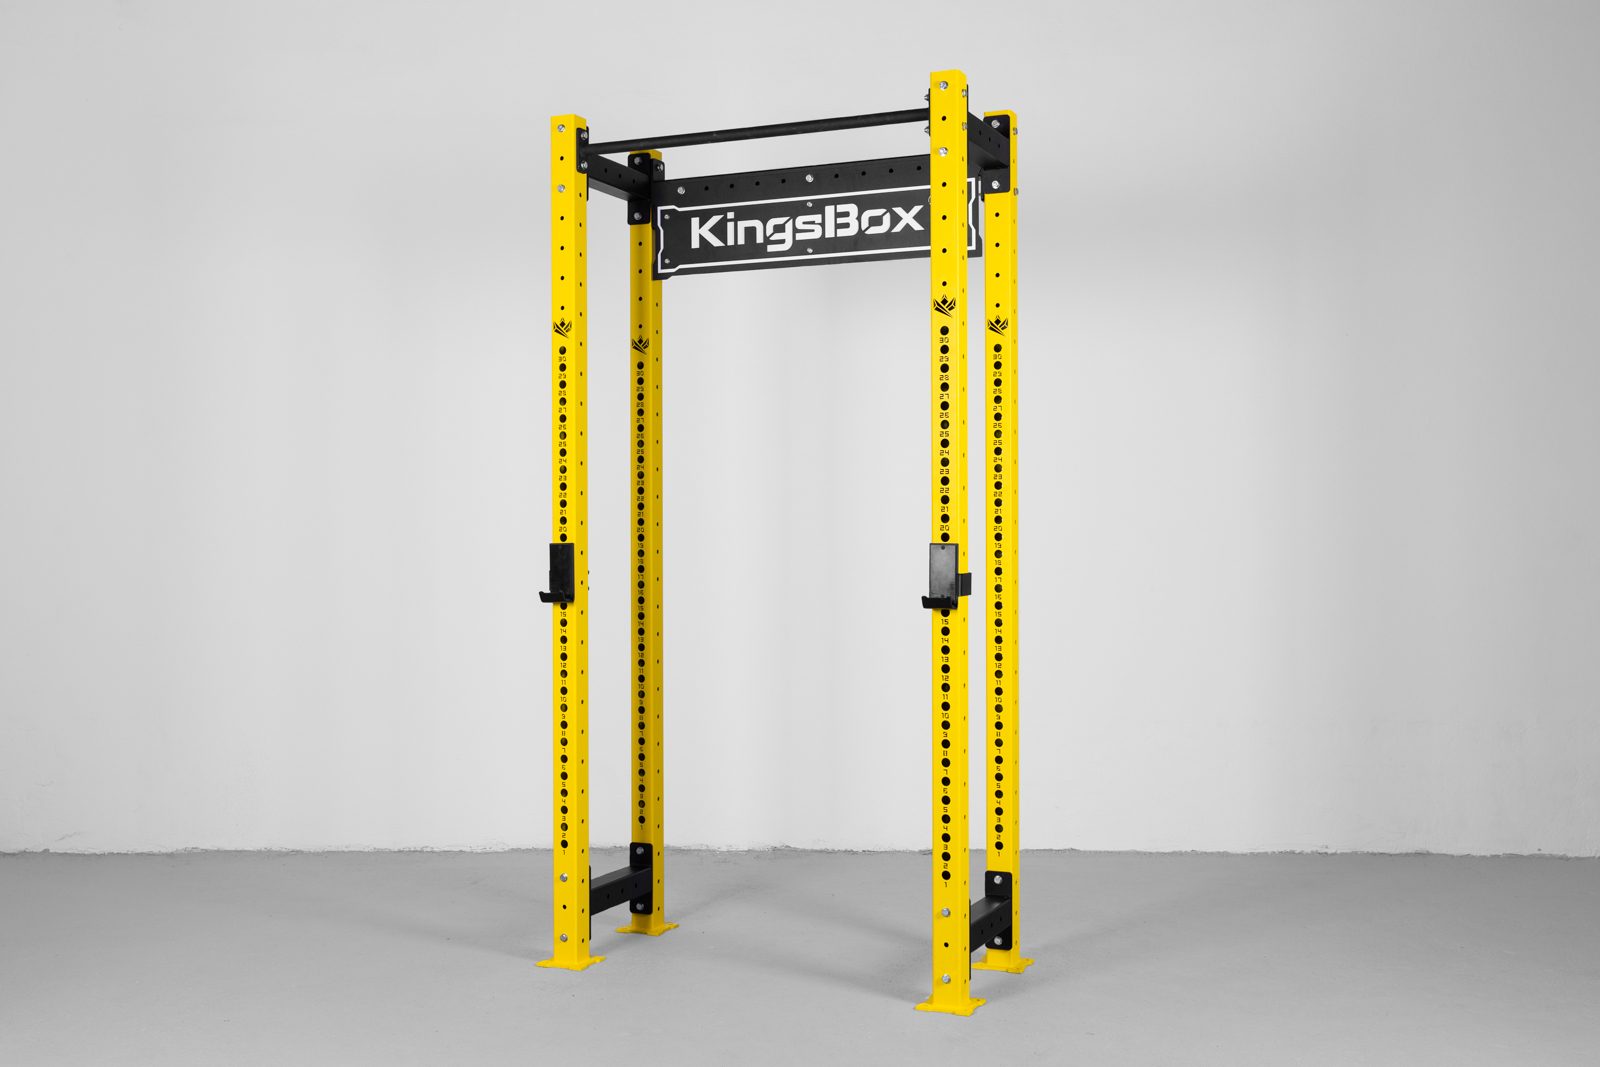 OUTLET - Mighty Power Rack CX-30 yellow | KingsBox